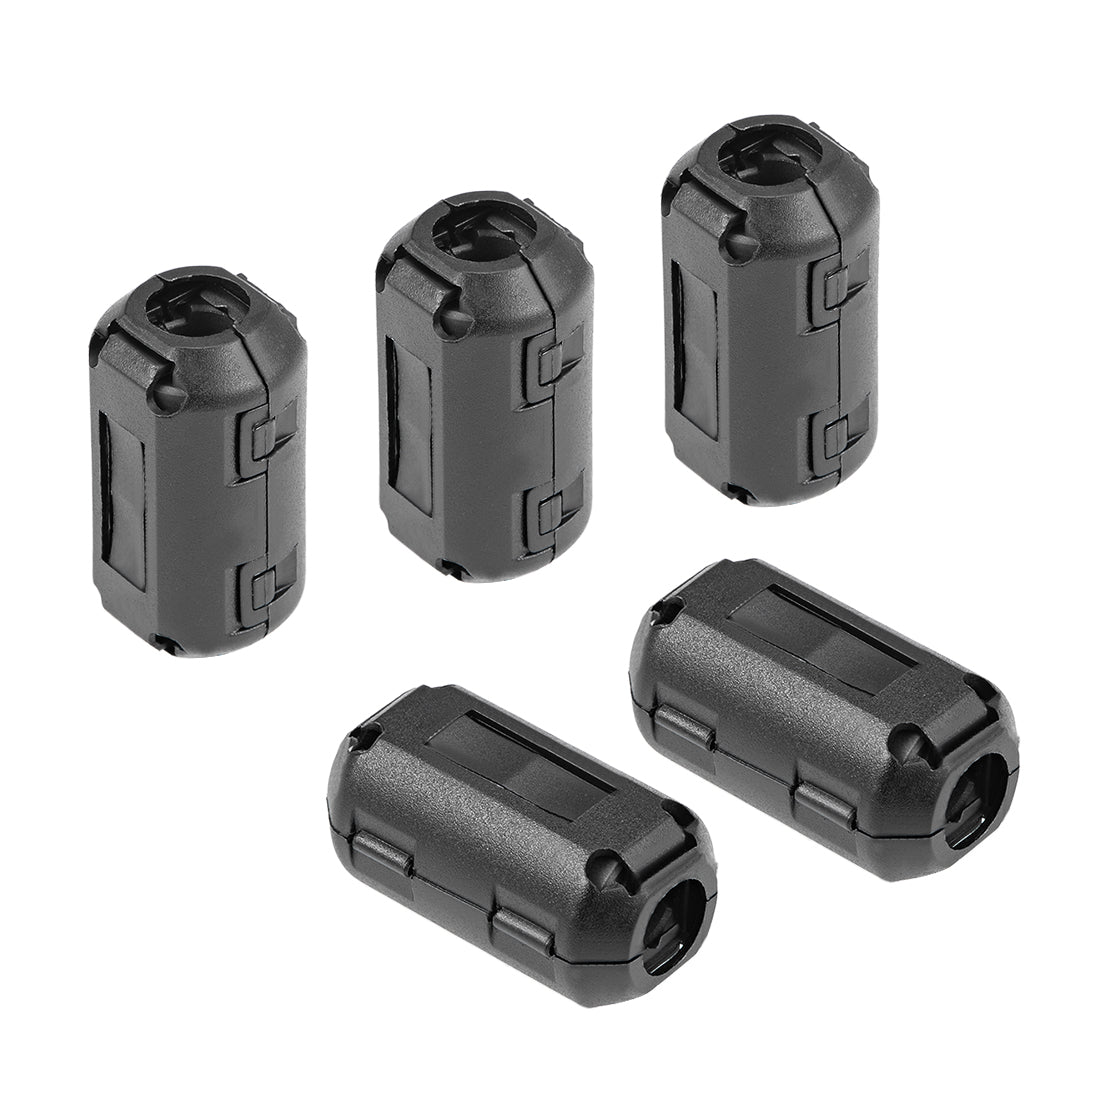 uxcell Uxcell 9mm Ferrite Cores Ring Clip-On RFI EMI Noise Suppression Filter Cable Clip, Black 5pcs